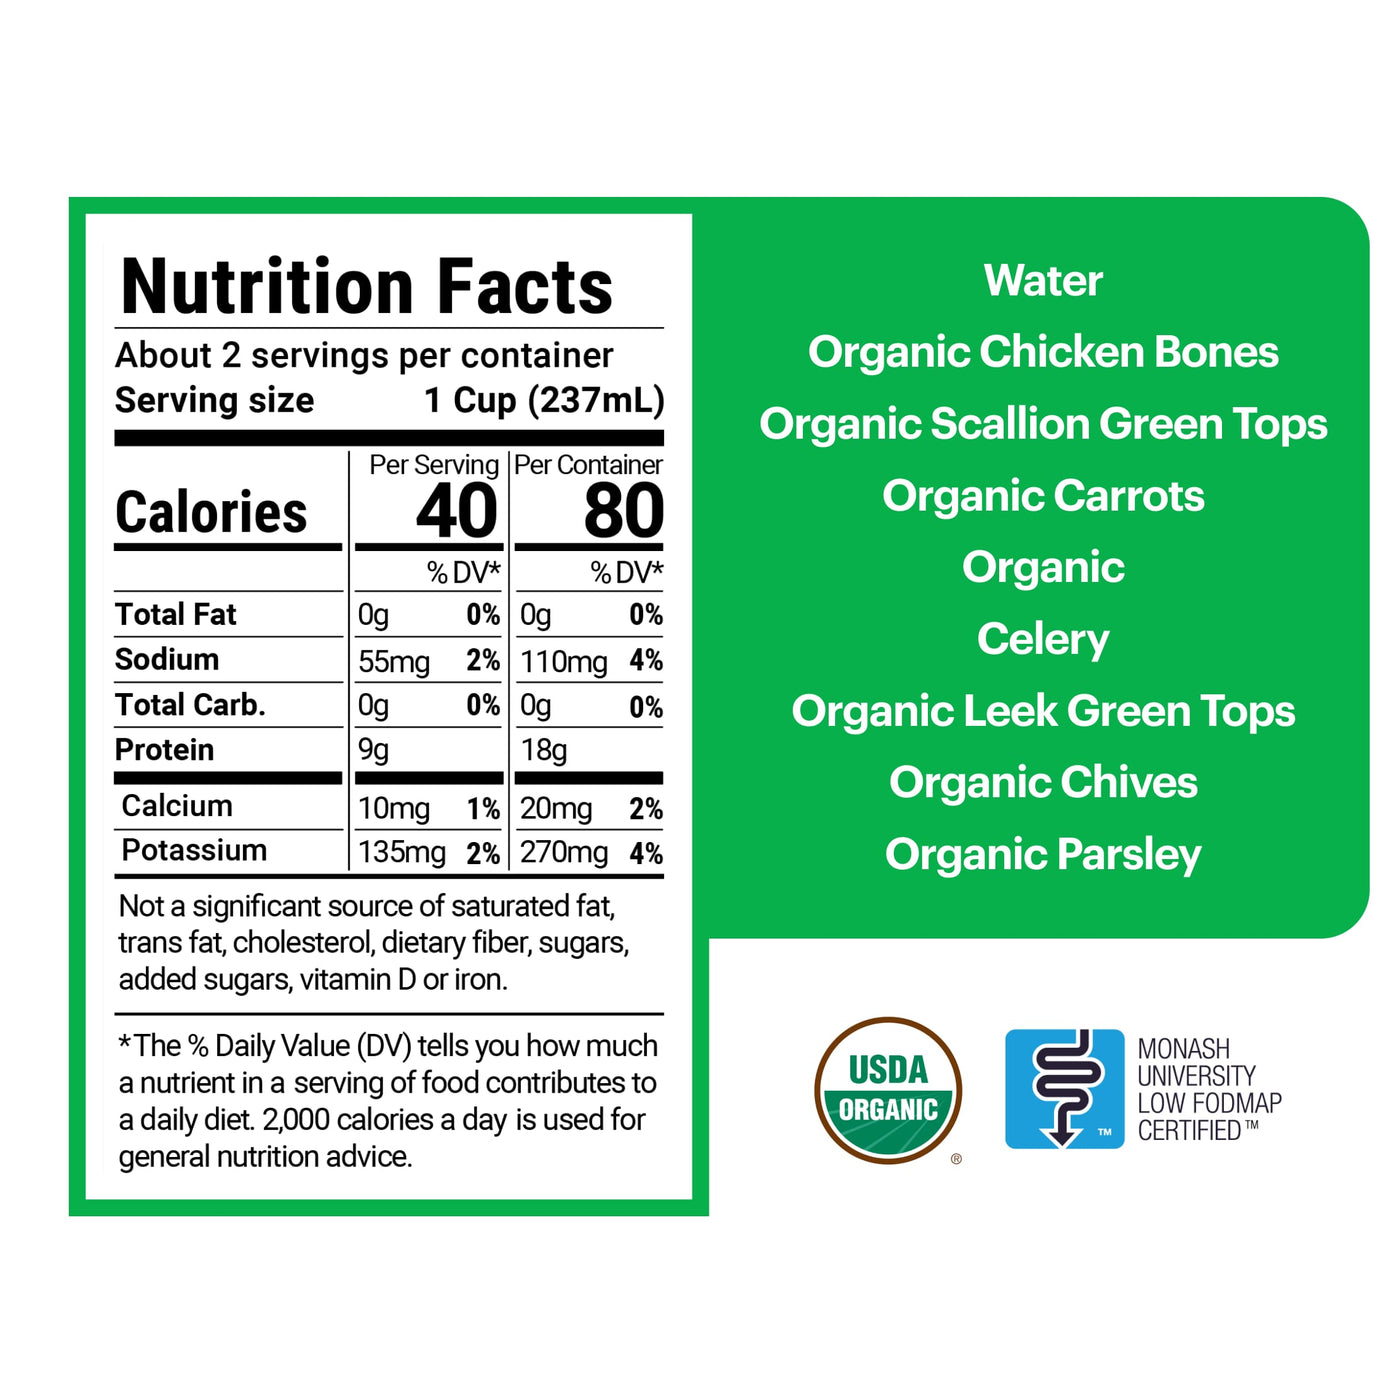 2 servings per container, each serving being 1 cup (237 mL). 40 calories per serving with 0g of total fat, 55mg of sodium, 0g of total carbohydrates, 9g of protein, 10mg of calcium, and 135mg of potassium. The ingredients are water, organic chicken bones, scallion green tops, carrots, celery, leek green tops, chives, and parsley.